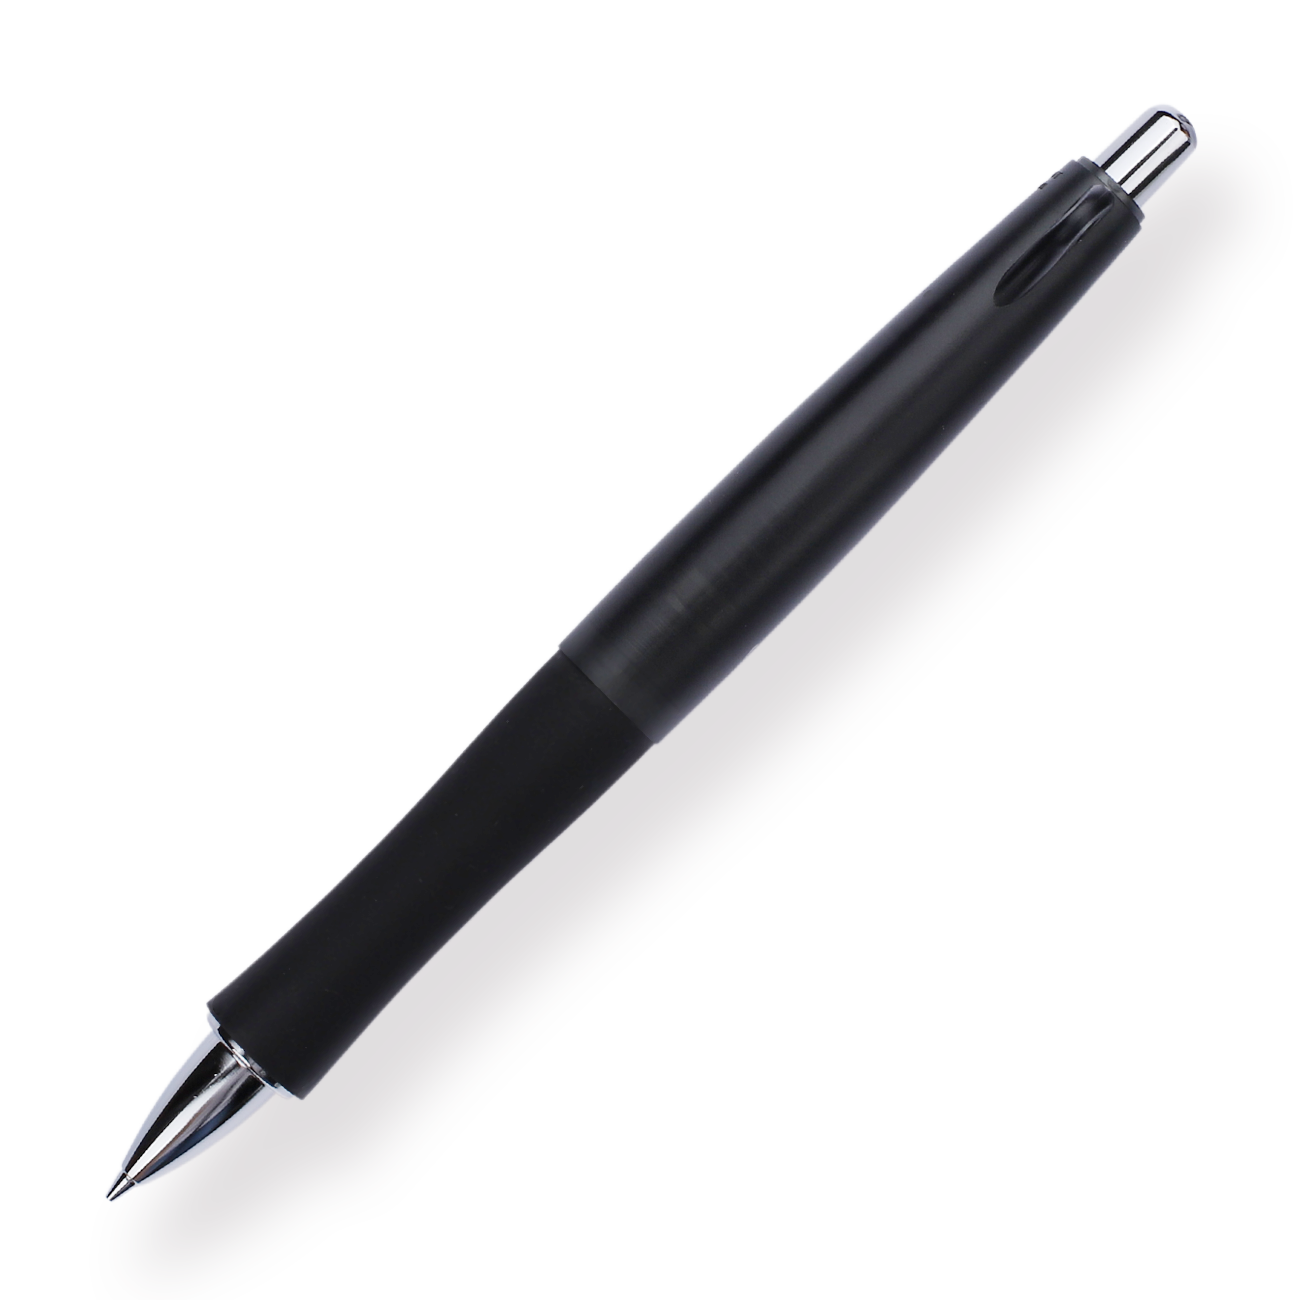 Pilot Dr. Grip Limited Edition Mechanical Pencil - 0.3 mm - Classic - Black - Stationery Pal